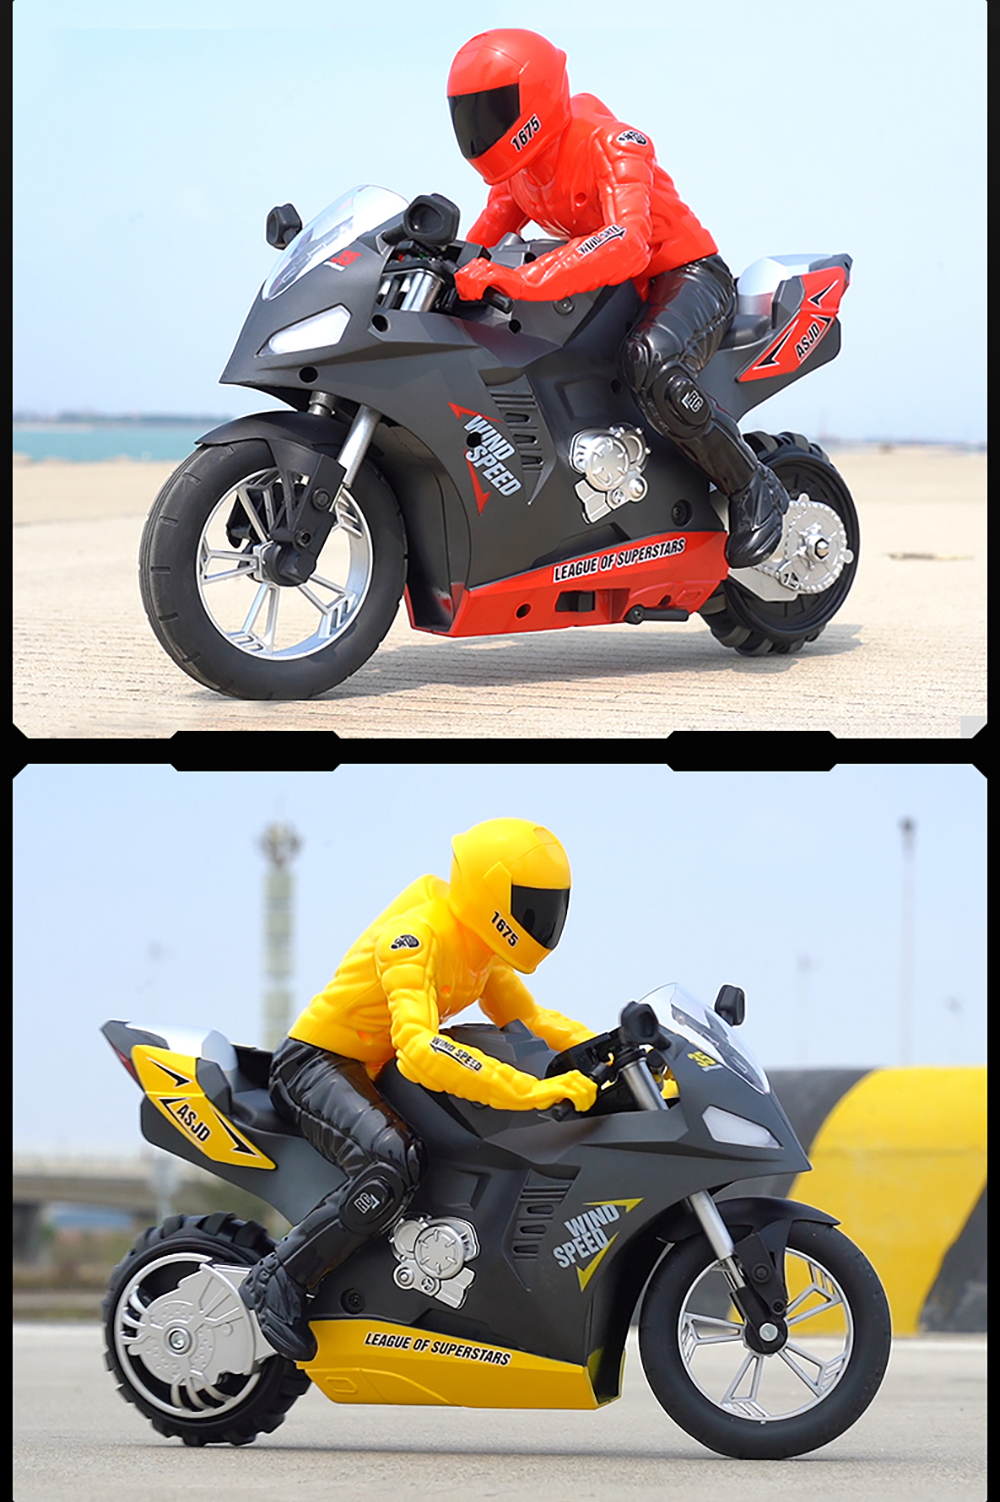 HC-801 2.4G 35CM RC Motorcycle Stunt Car Vehicle Models RTR High Speed 20km/h 210min Use Time - Photo: 11